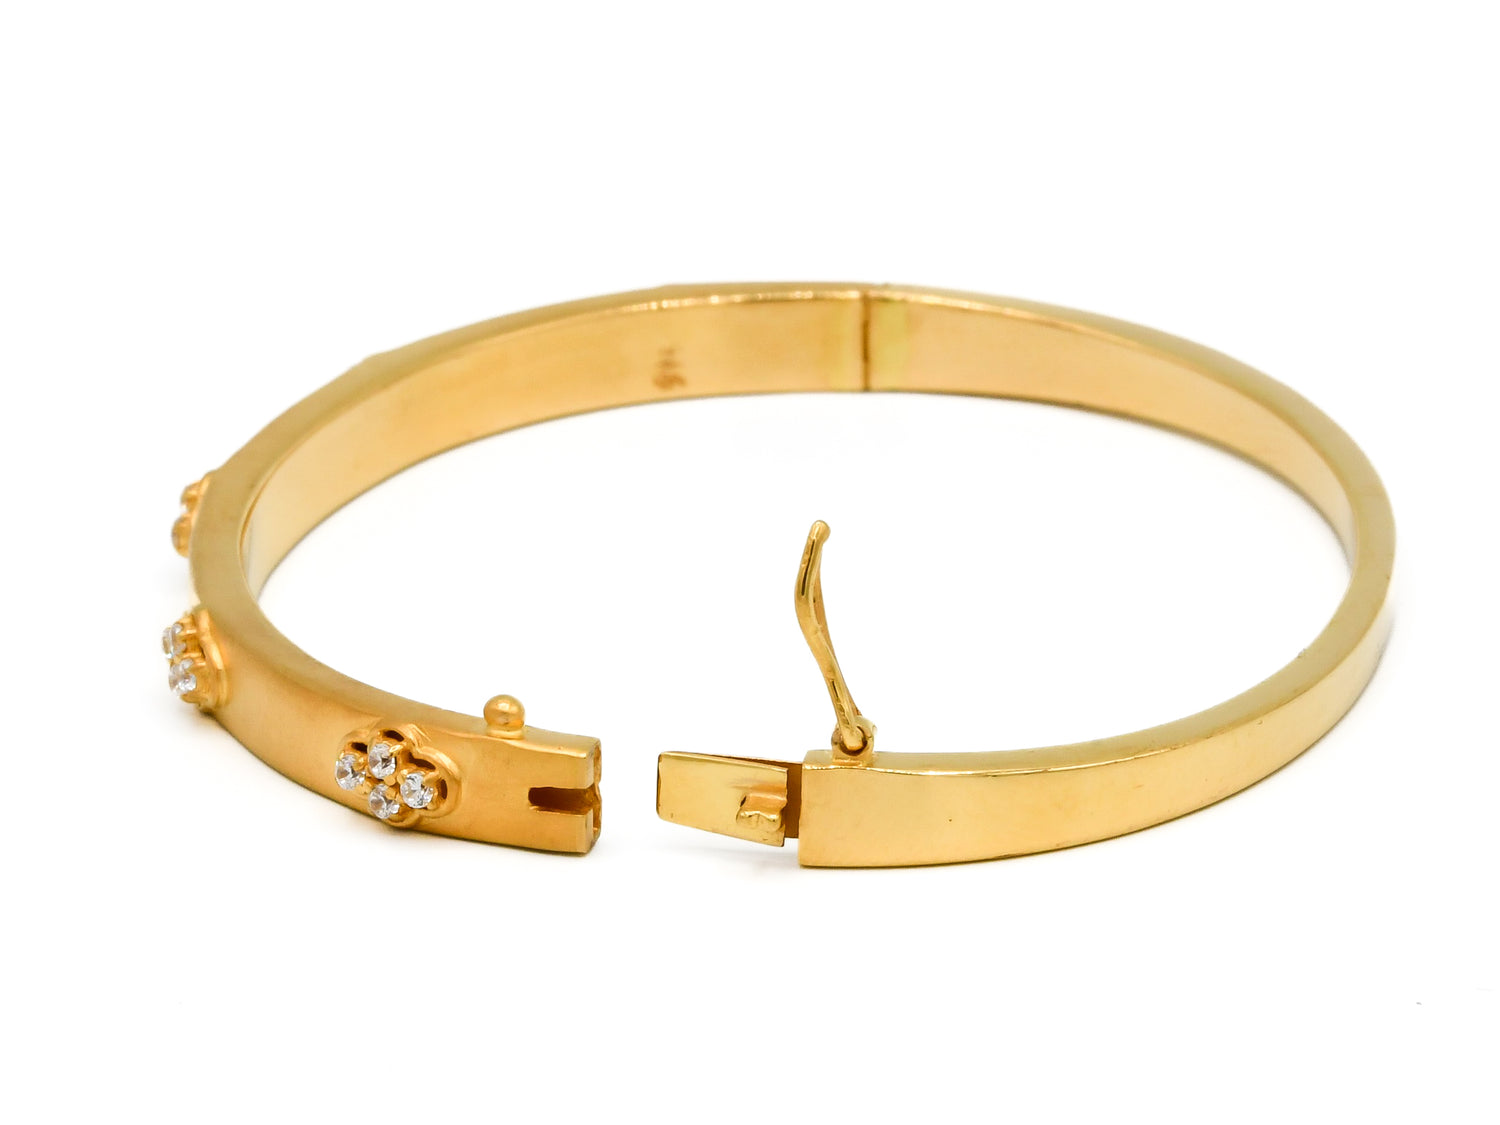 22ct Gold CZ Oval Shaped 1 Piece Bangle - Roop Darshan